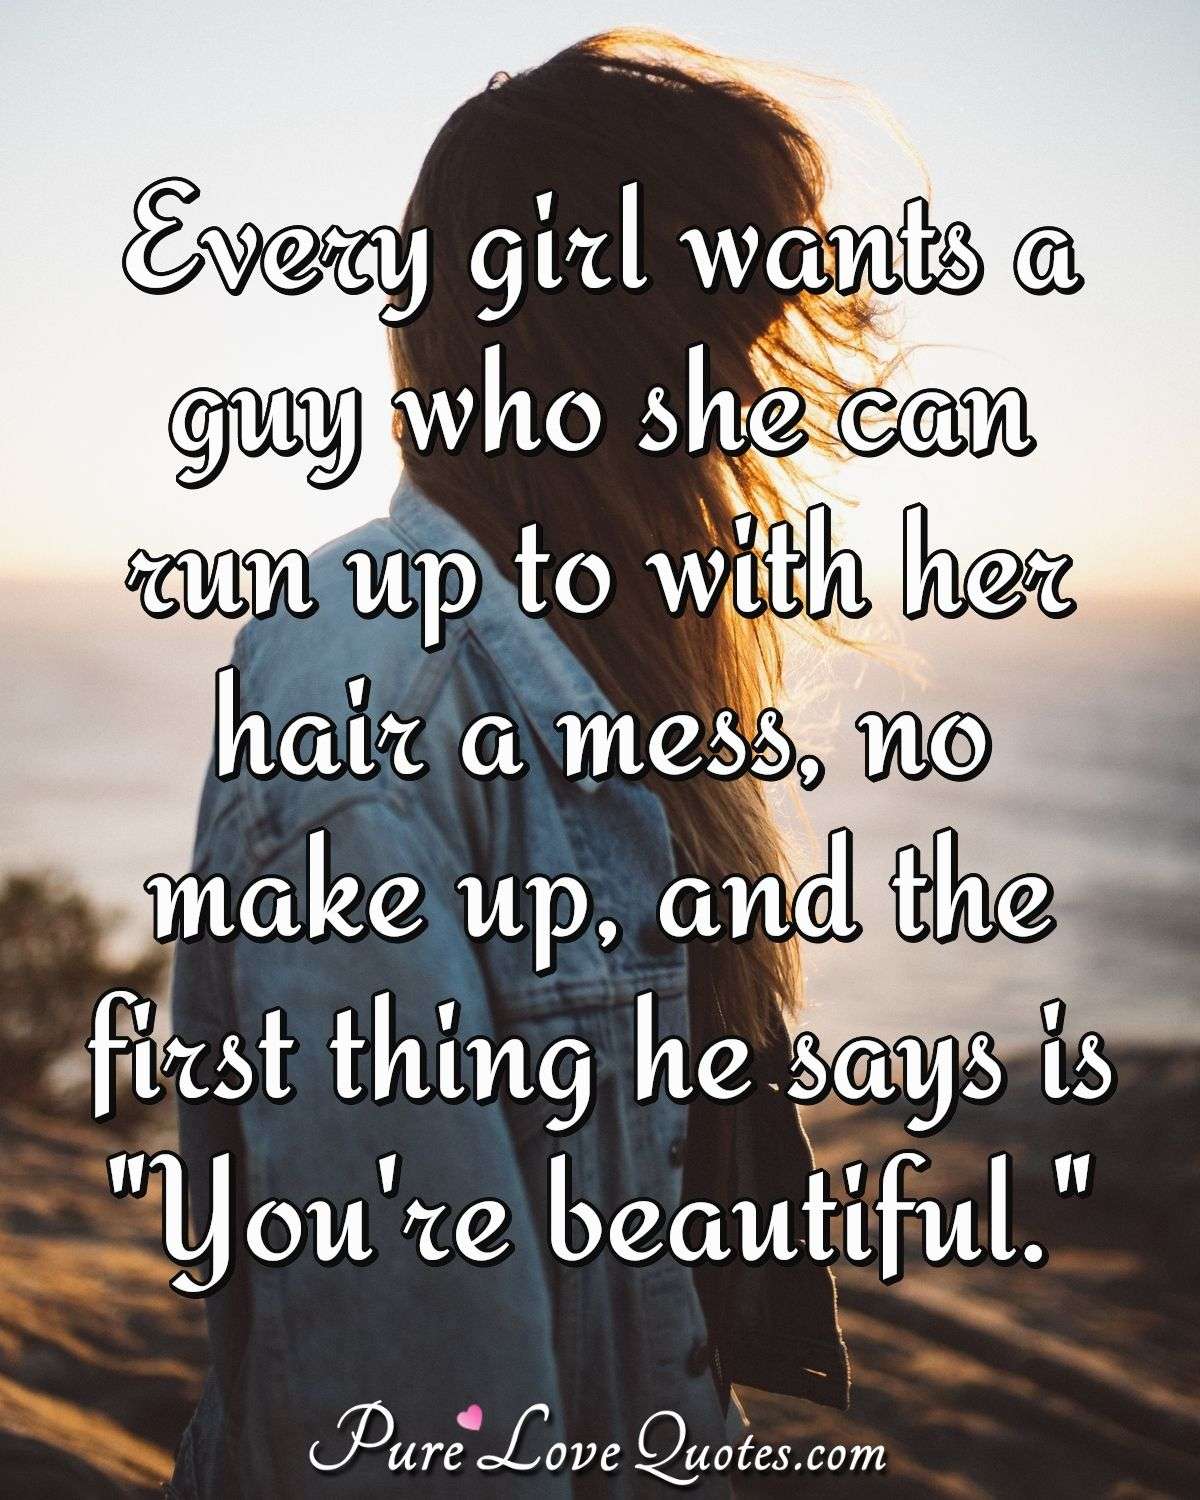 Every girl wants a guy who she can run up to with her hair a mess